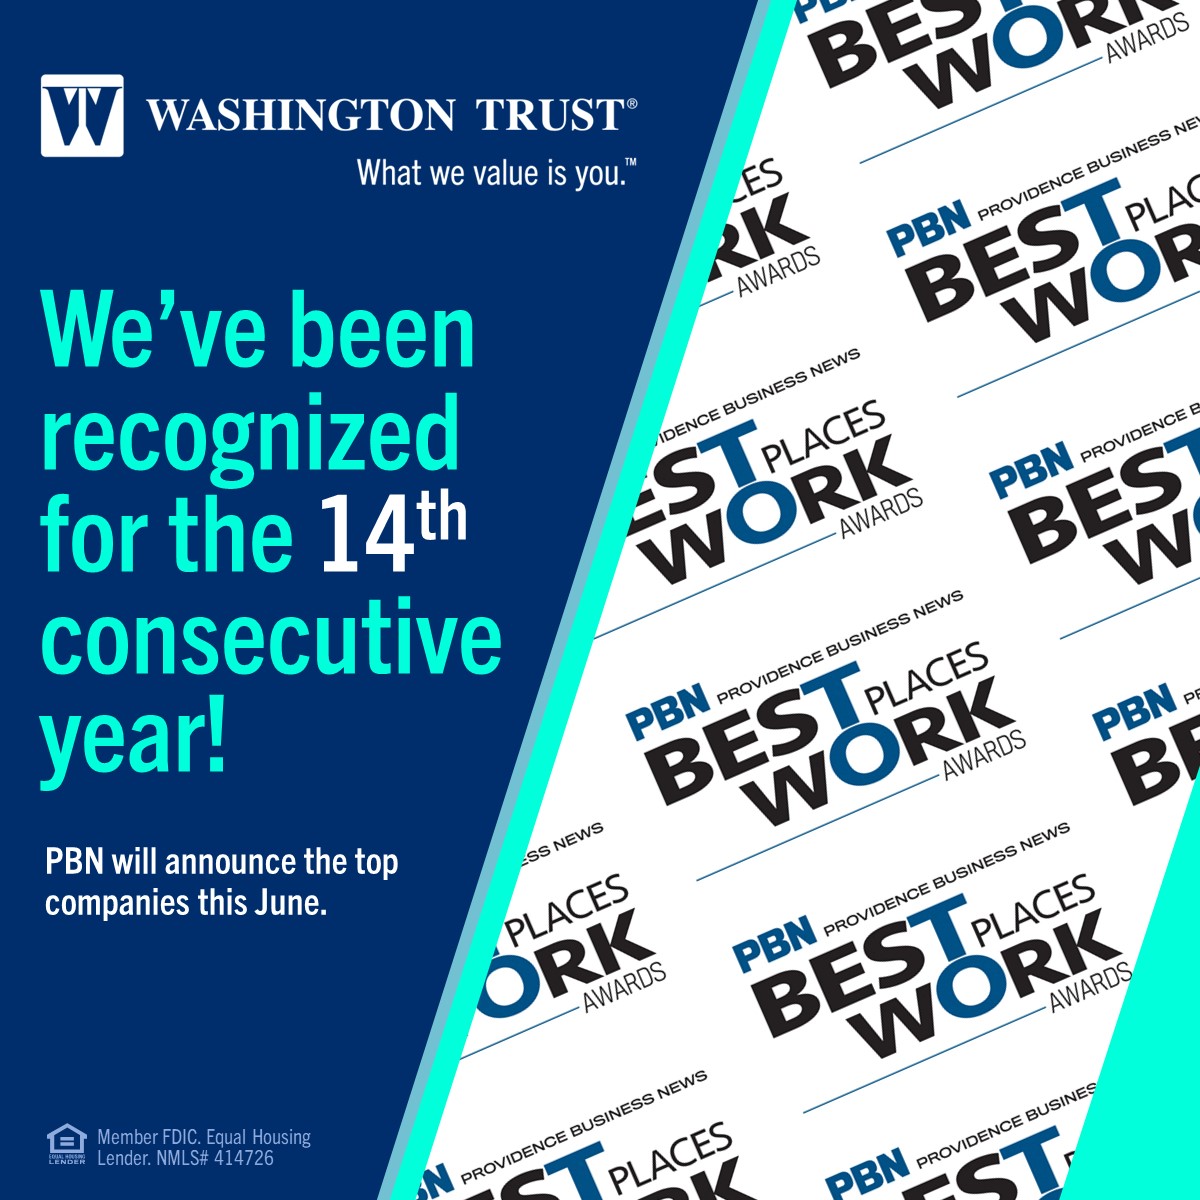 Hosted by @ProvBusNews, #BestPlacestoWorkRI recognizes outstanding employers based on workplace policies, employee surveys, environment, morale, benefits, & growth opportunities. Top companies to be announced in June! #BPTW #iLuvRI